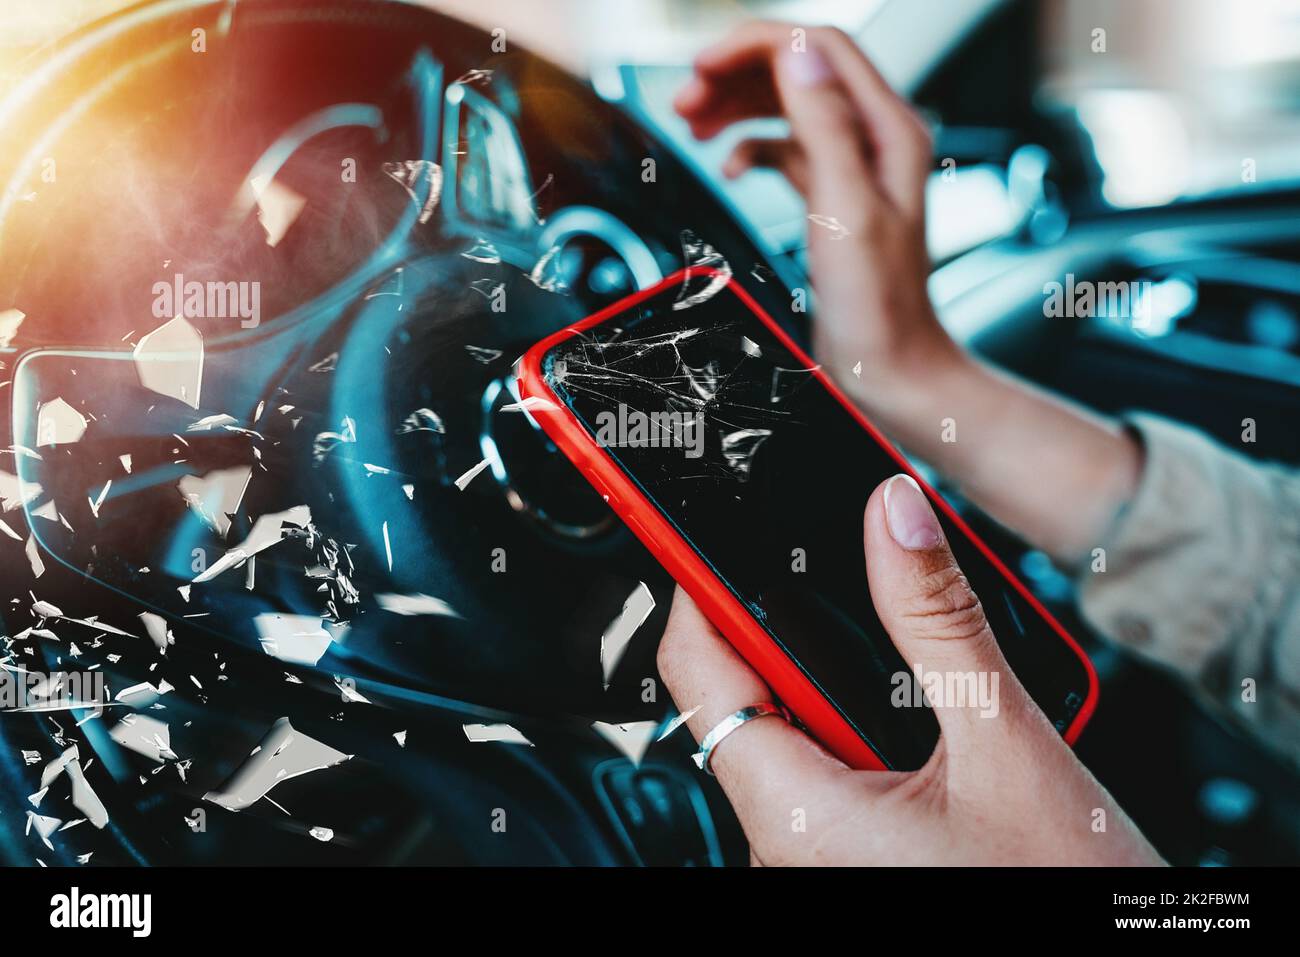 Woman drives dangerously with smartphone in hand Stock Photo